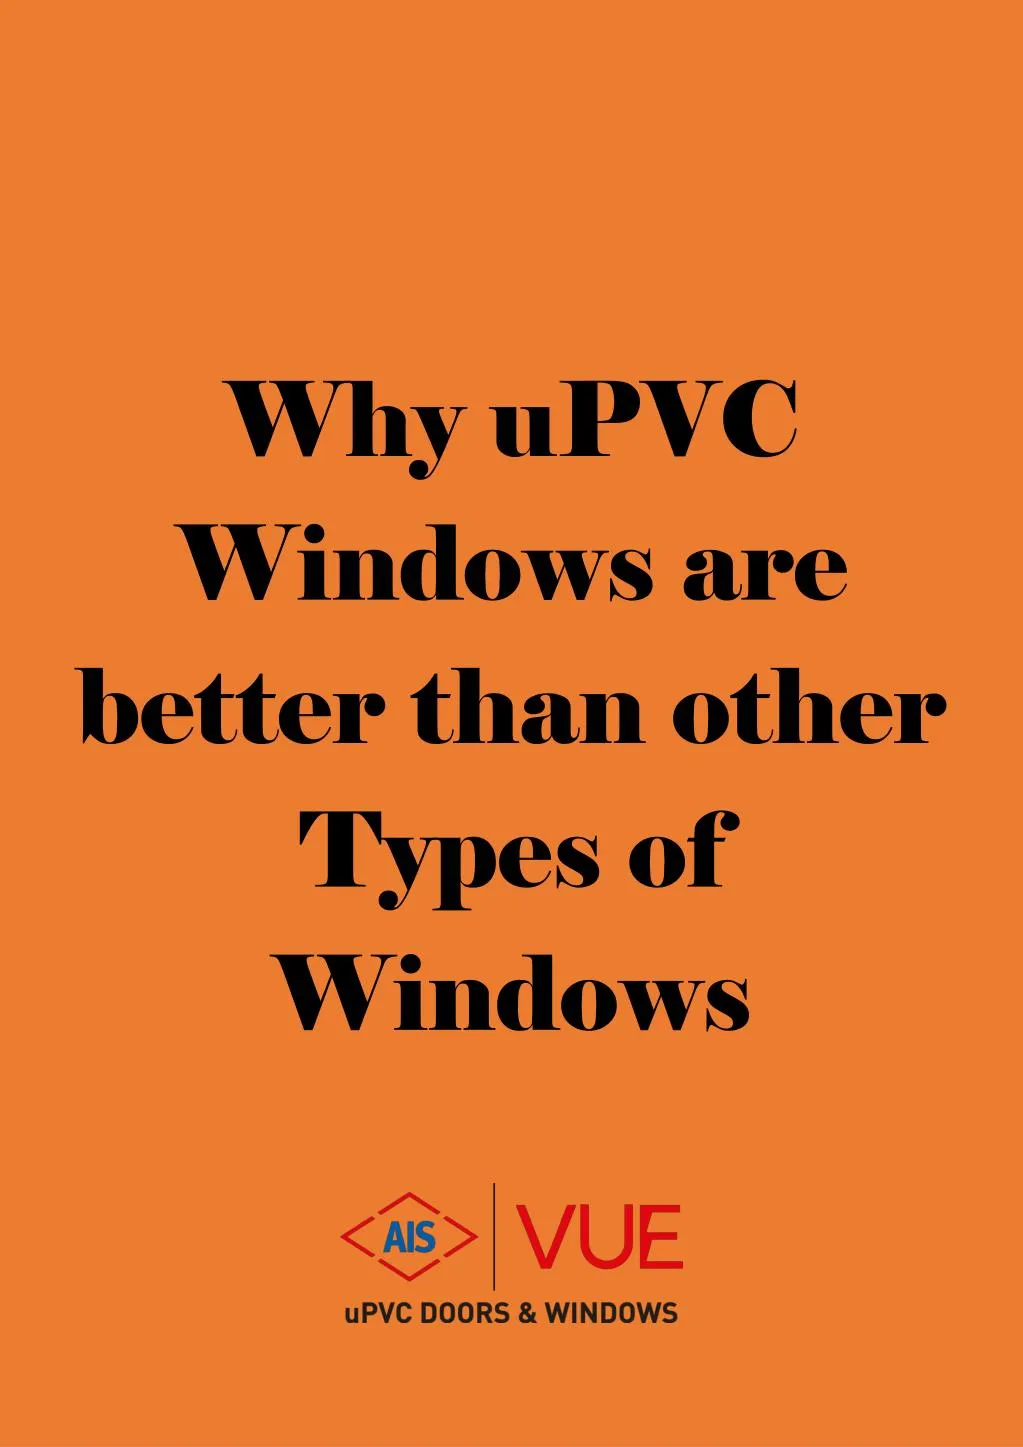 why upvc windows are better than other types